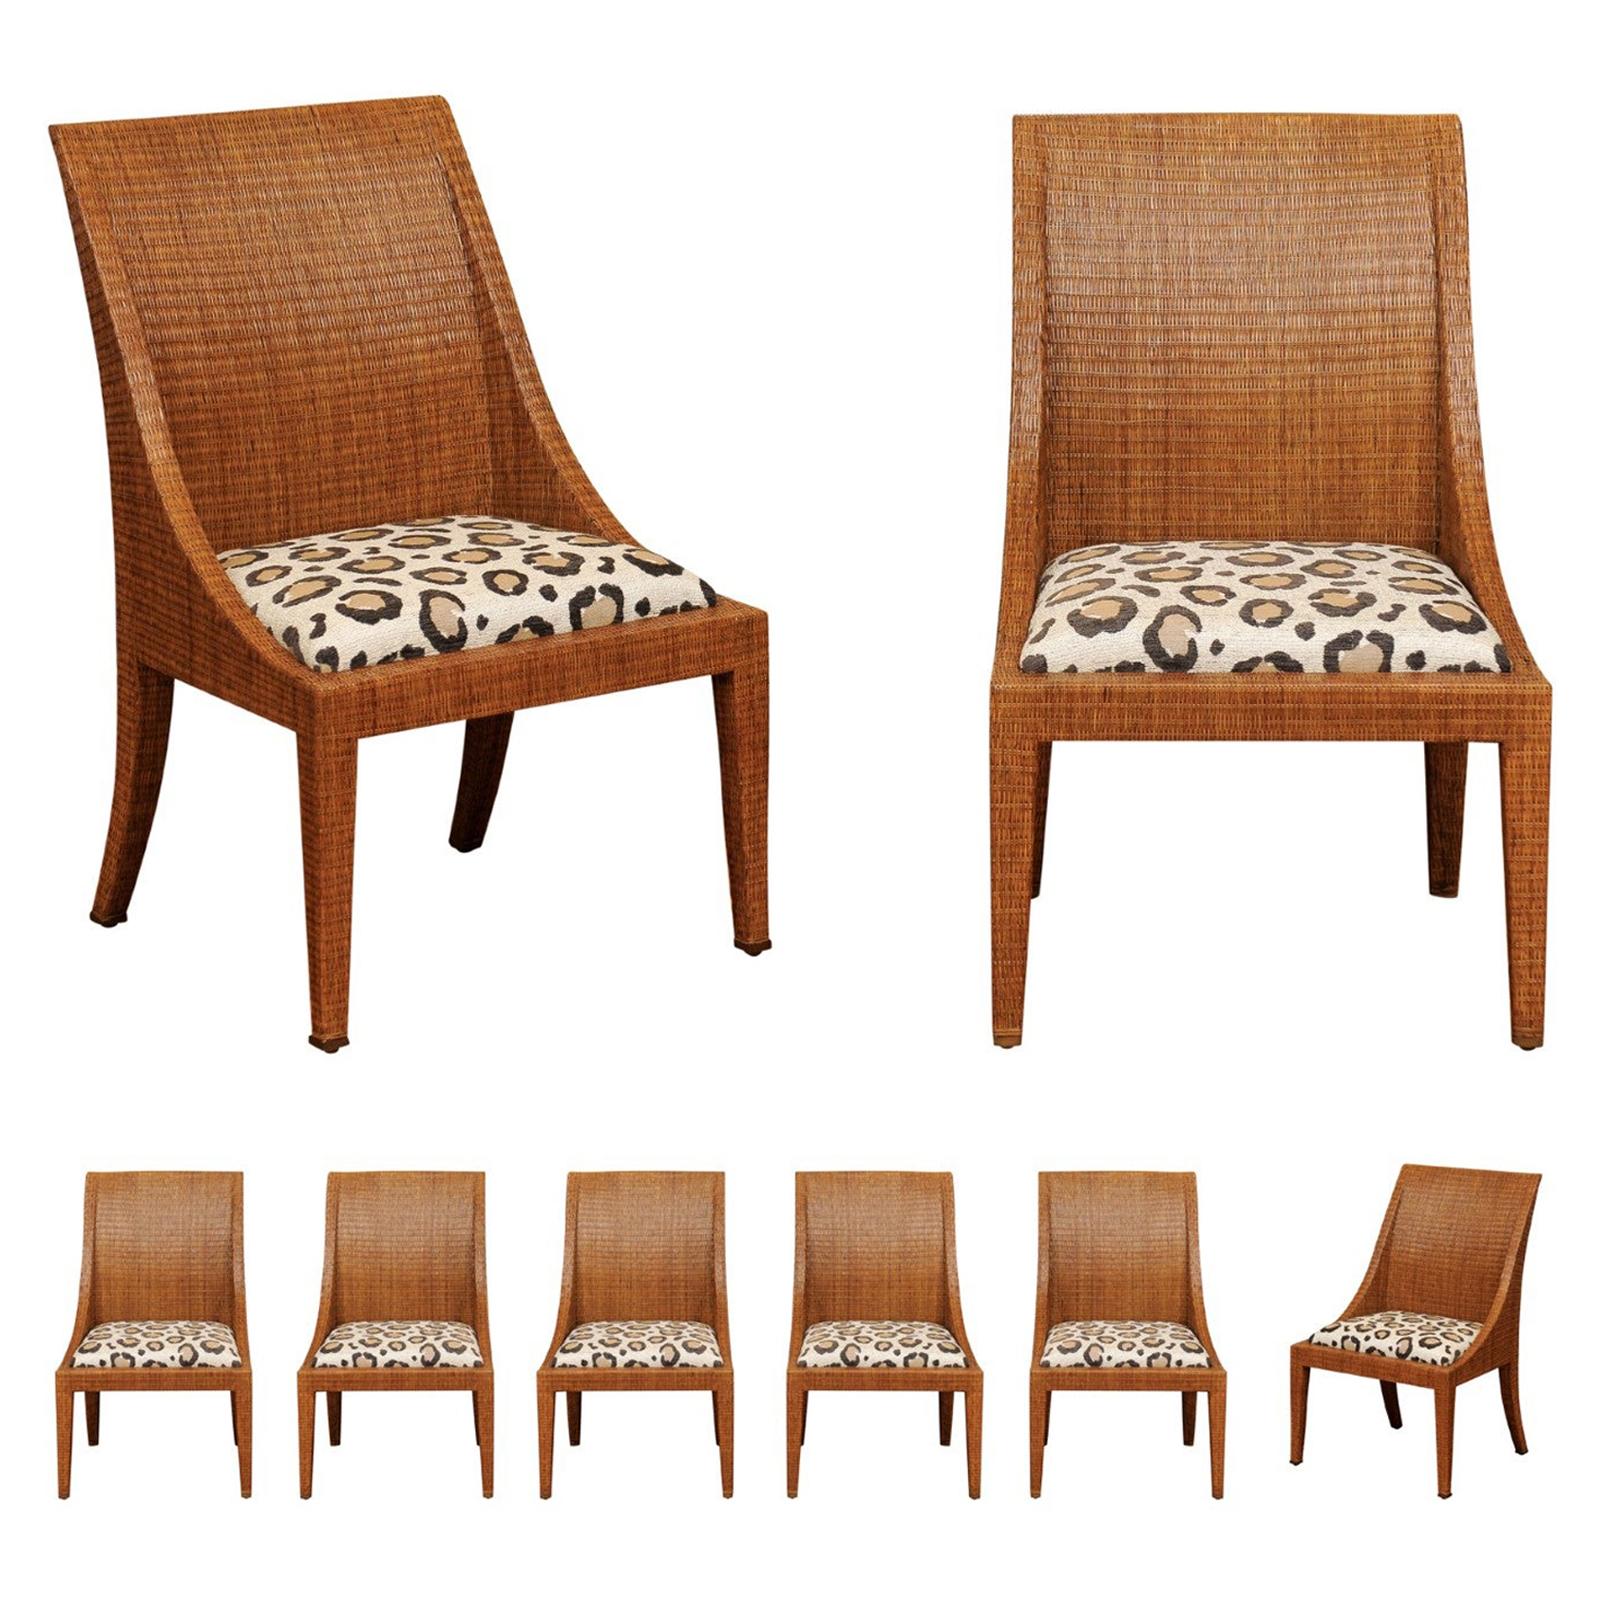 Elegant Restored Set of 8 Cane Dining Chairs by McGuire For Sale